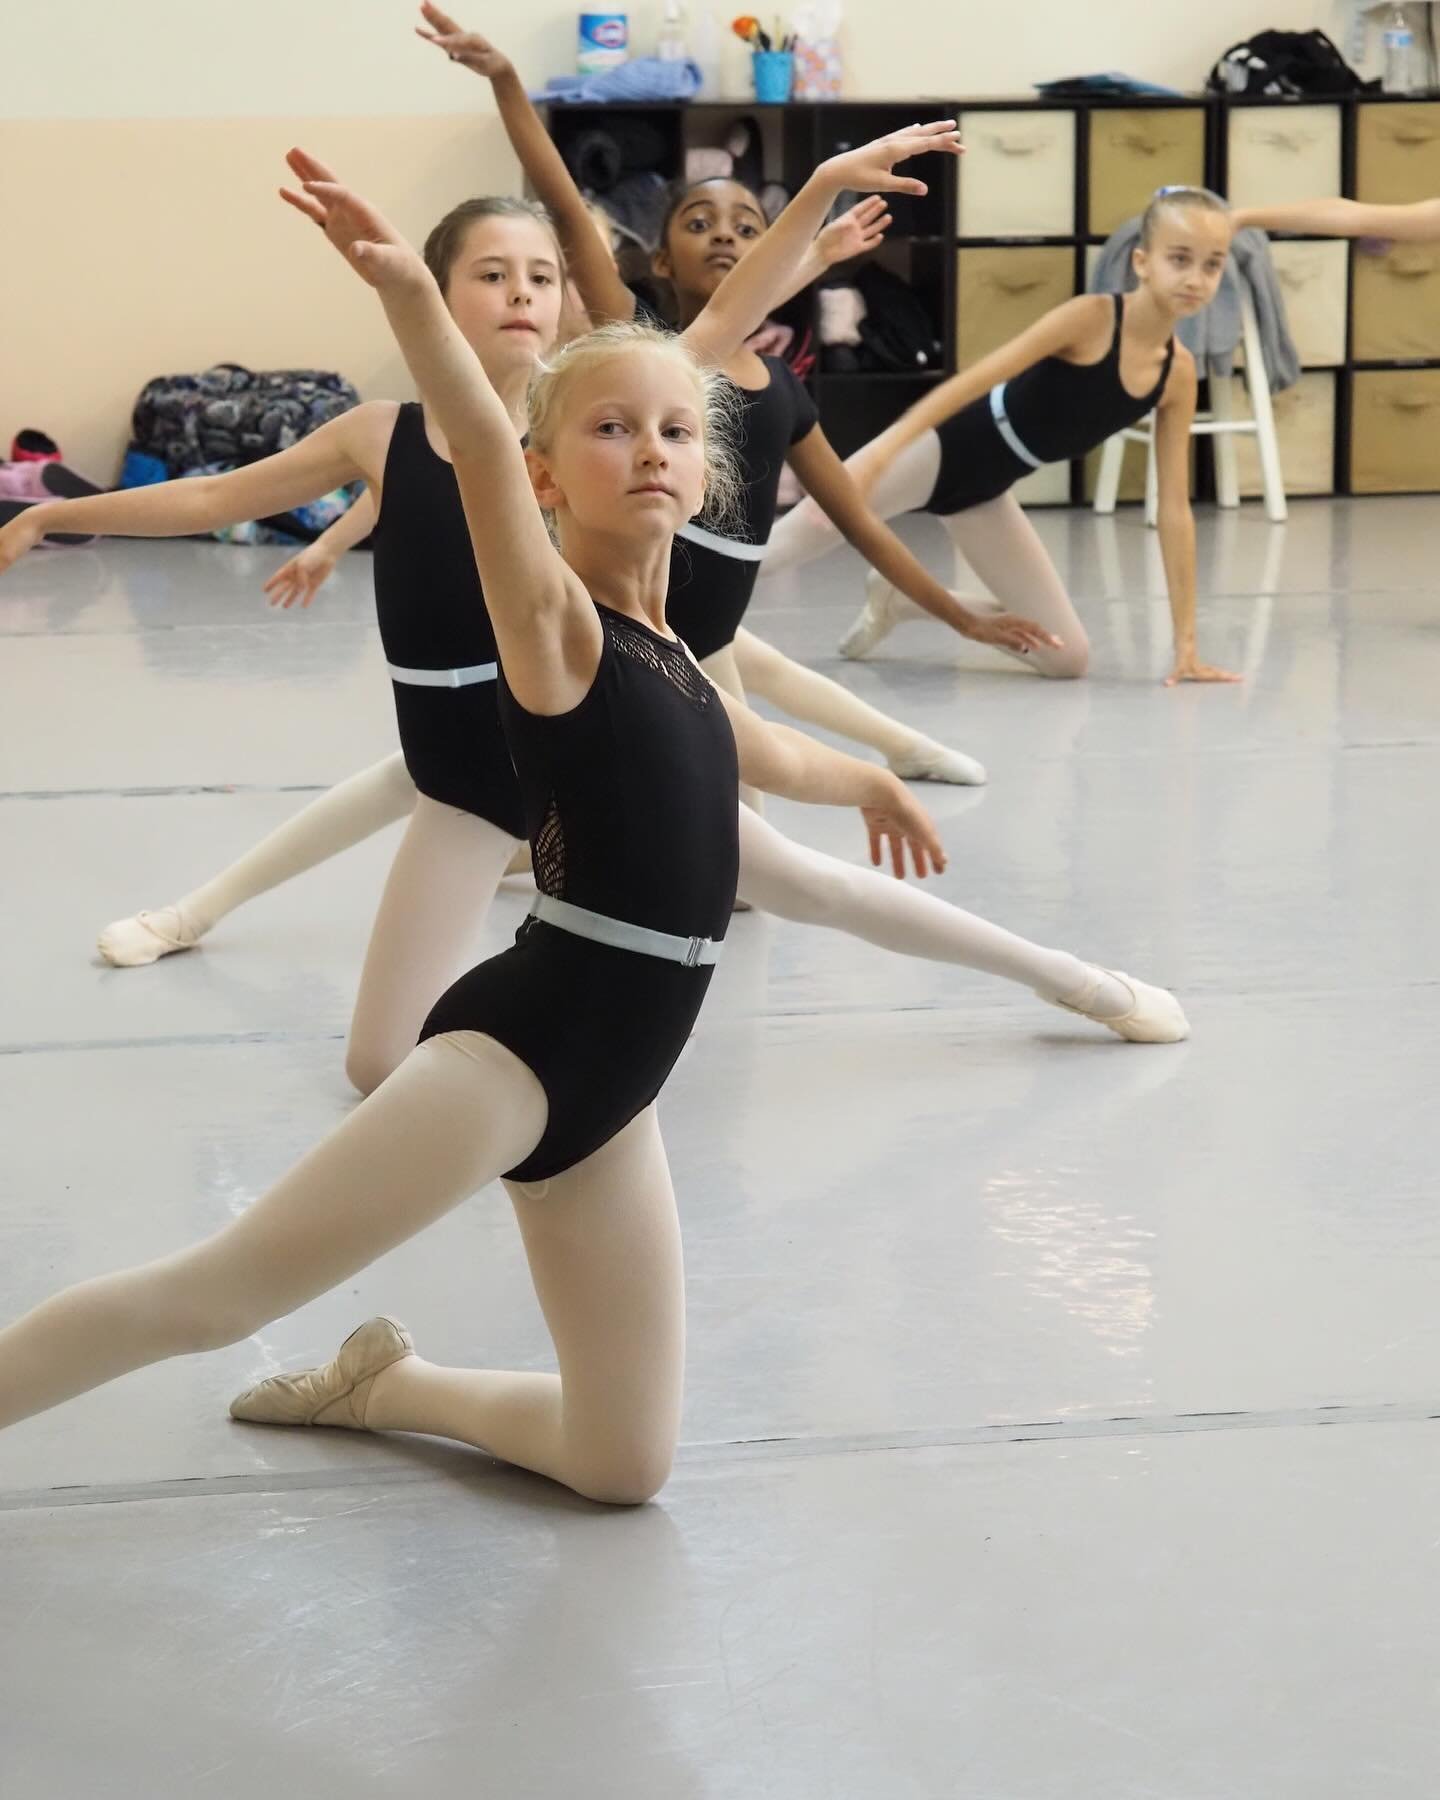 We&rsquo;re a month and a half out from our school recital and the class pieces are taking shape! Save the date June 22nd, and families, make sure you have your tickets!

#ballet #ballerinas #bunheads #balletgram #balletpost #balletlove #loveofballet